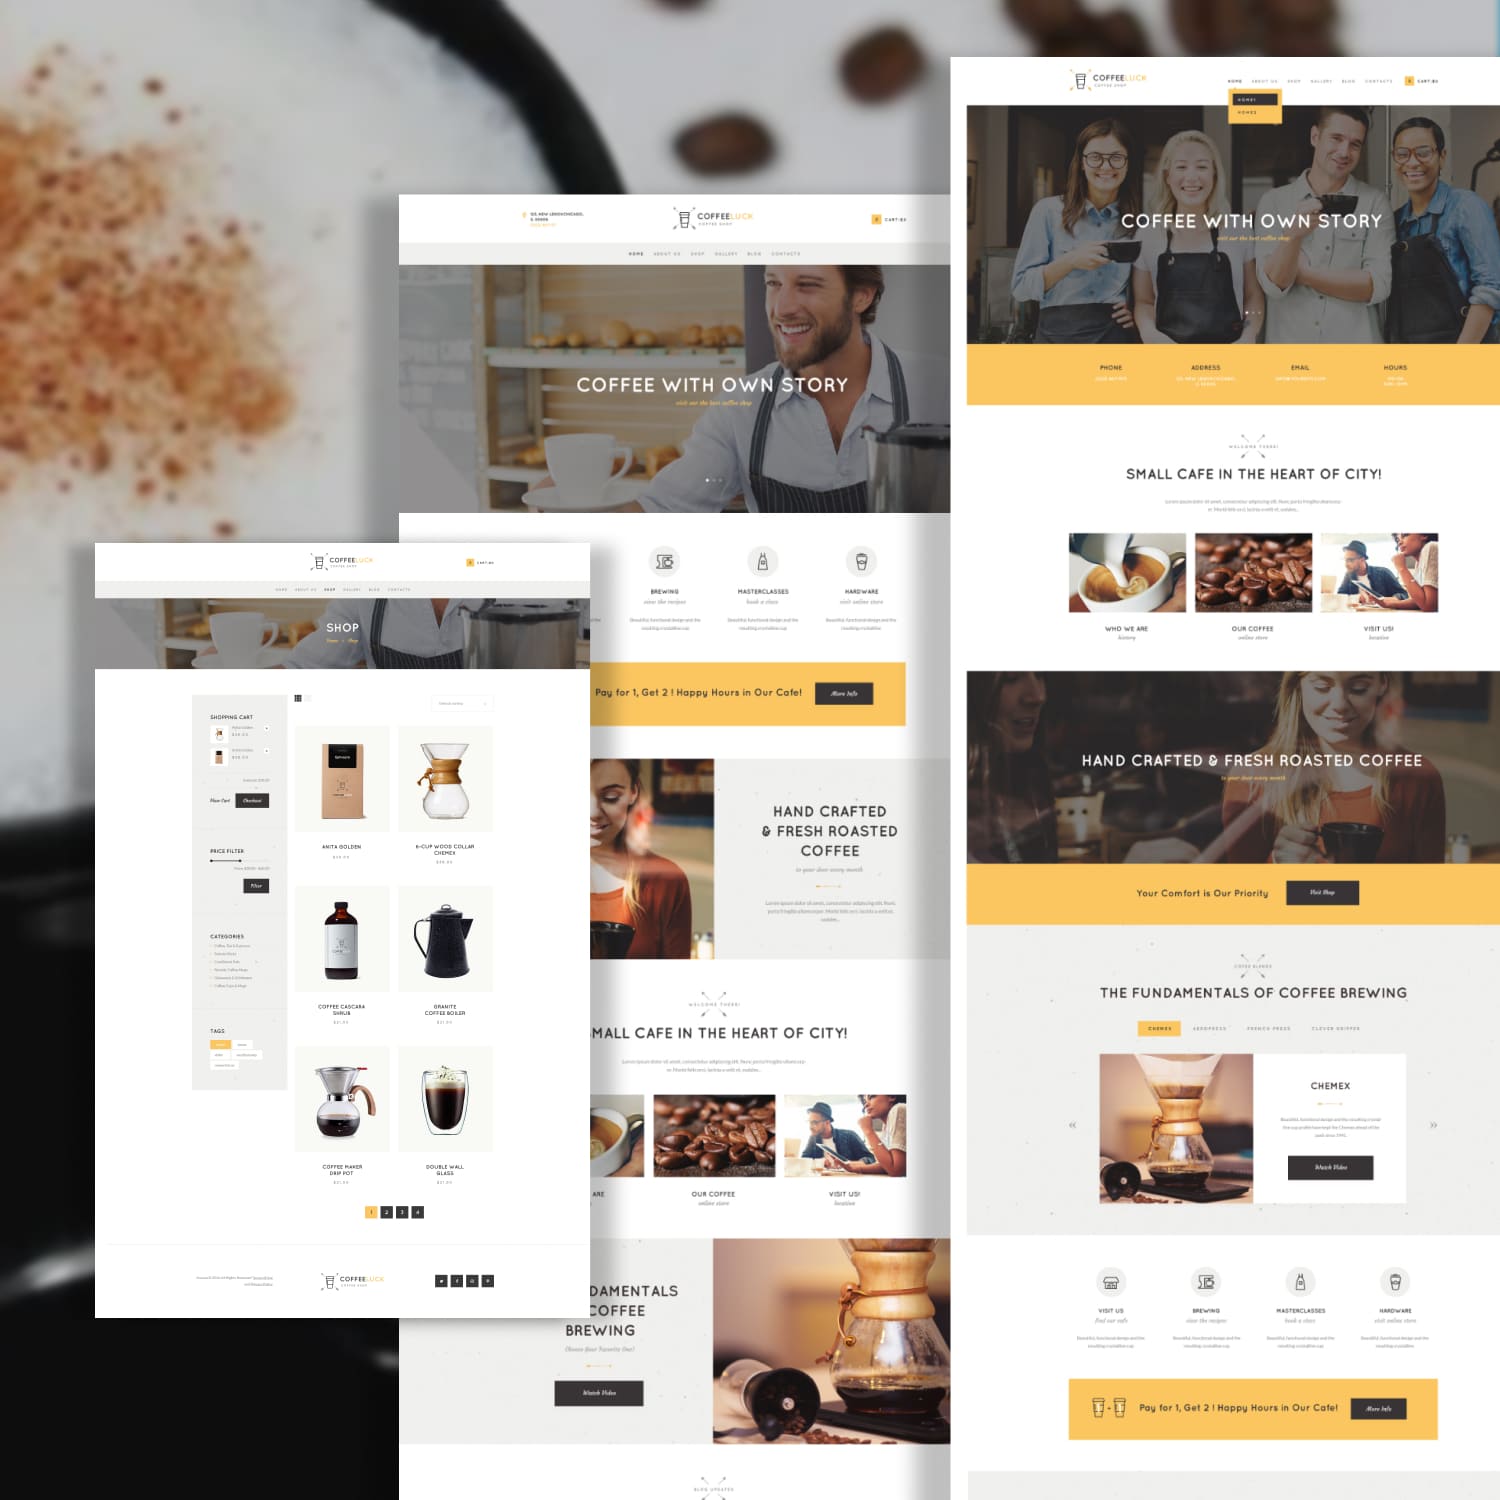 Hand crafted and fresh roated coffee of the Coffee Luck | Cafe, Restaurant & Shop WordPress Theme.